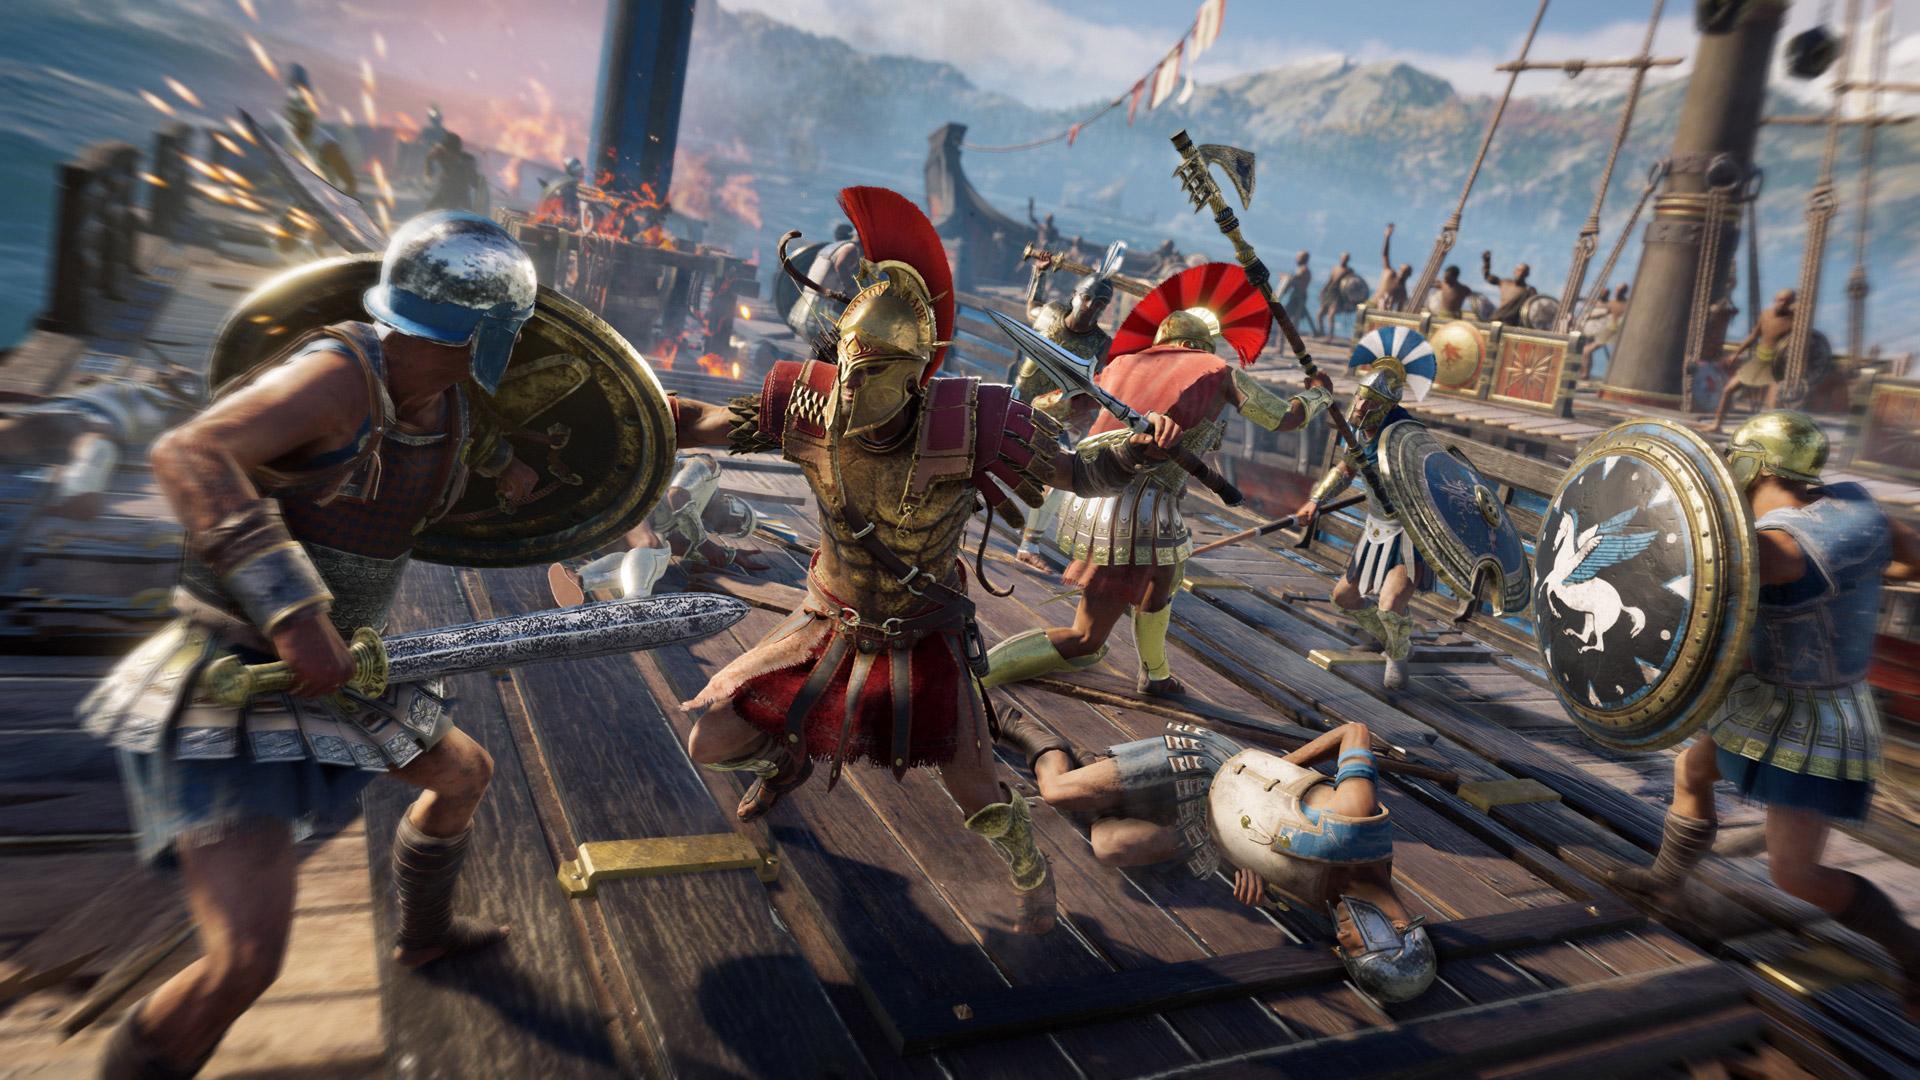 Free Assassin's Creed Odyssey Wallpapers in 1920x1080